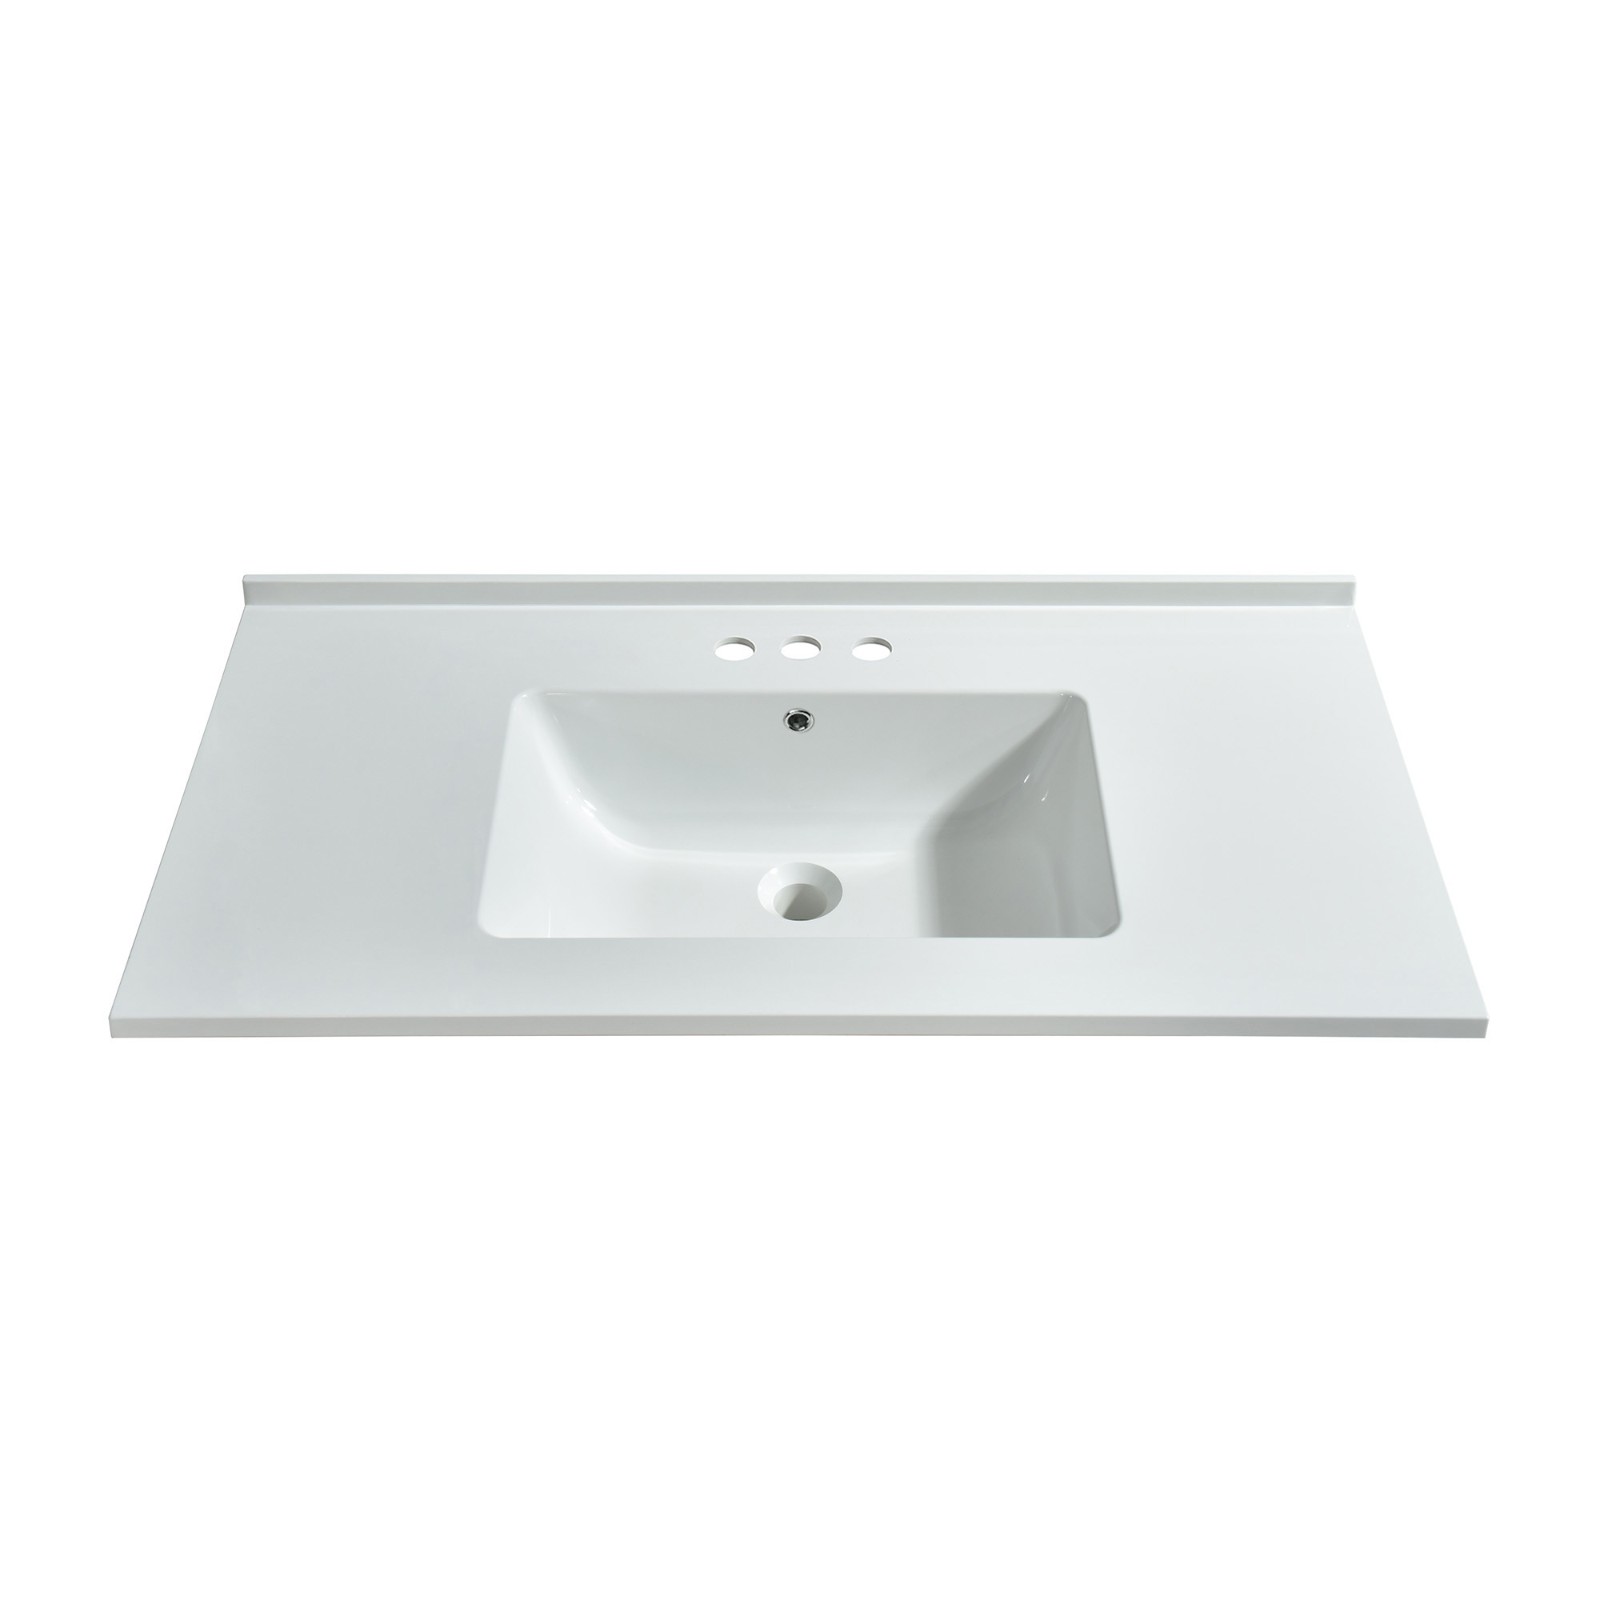  WOODBRIDGE VT4322-1008 Solid Surface Vanity Top with with Intergrated Sink and 3 Faucet Holes for 8-inch Widespread Faucet, 43